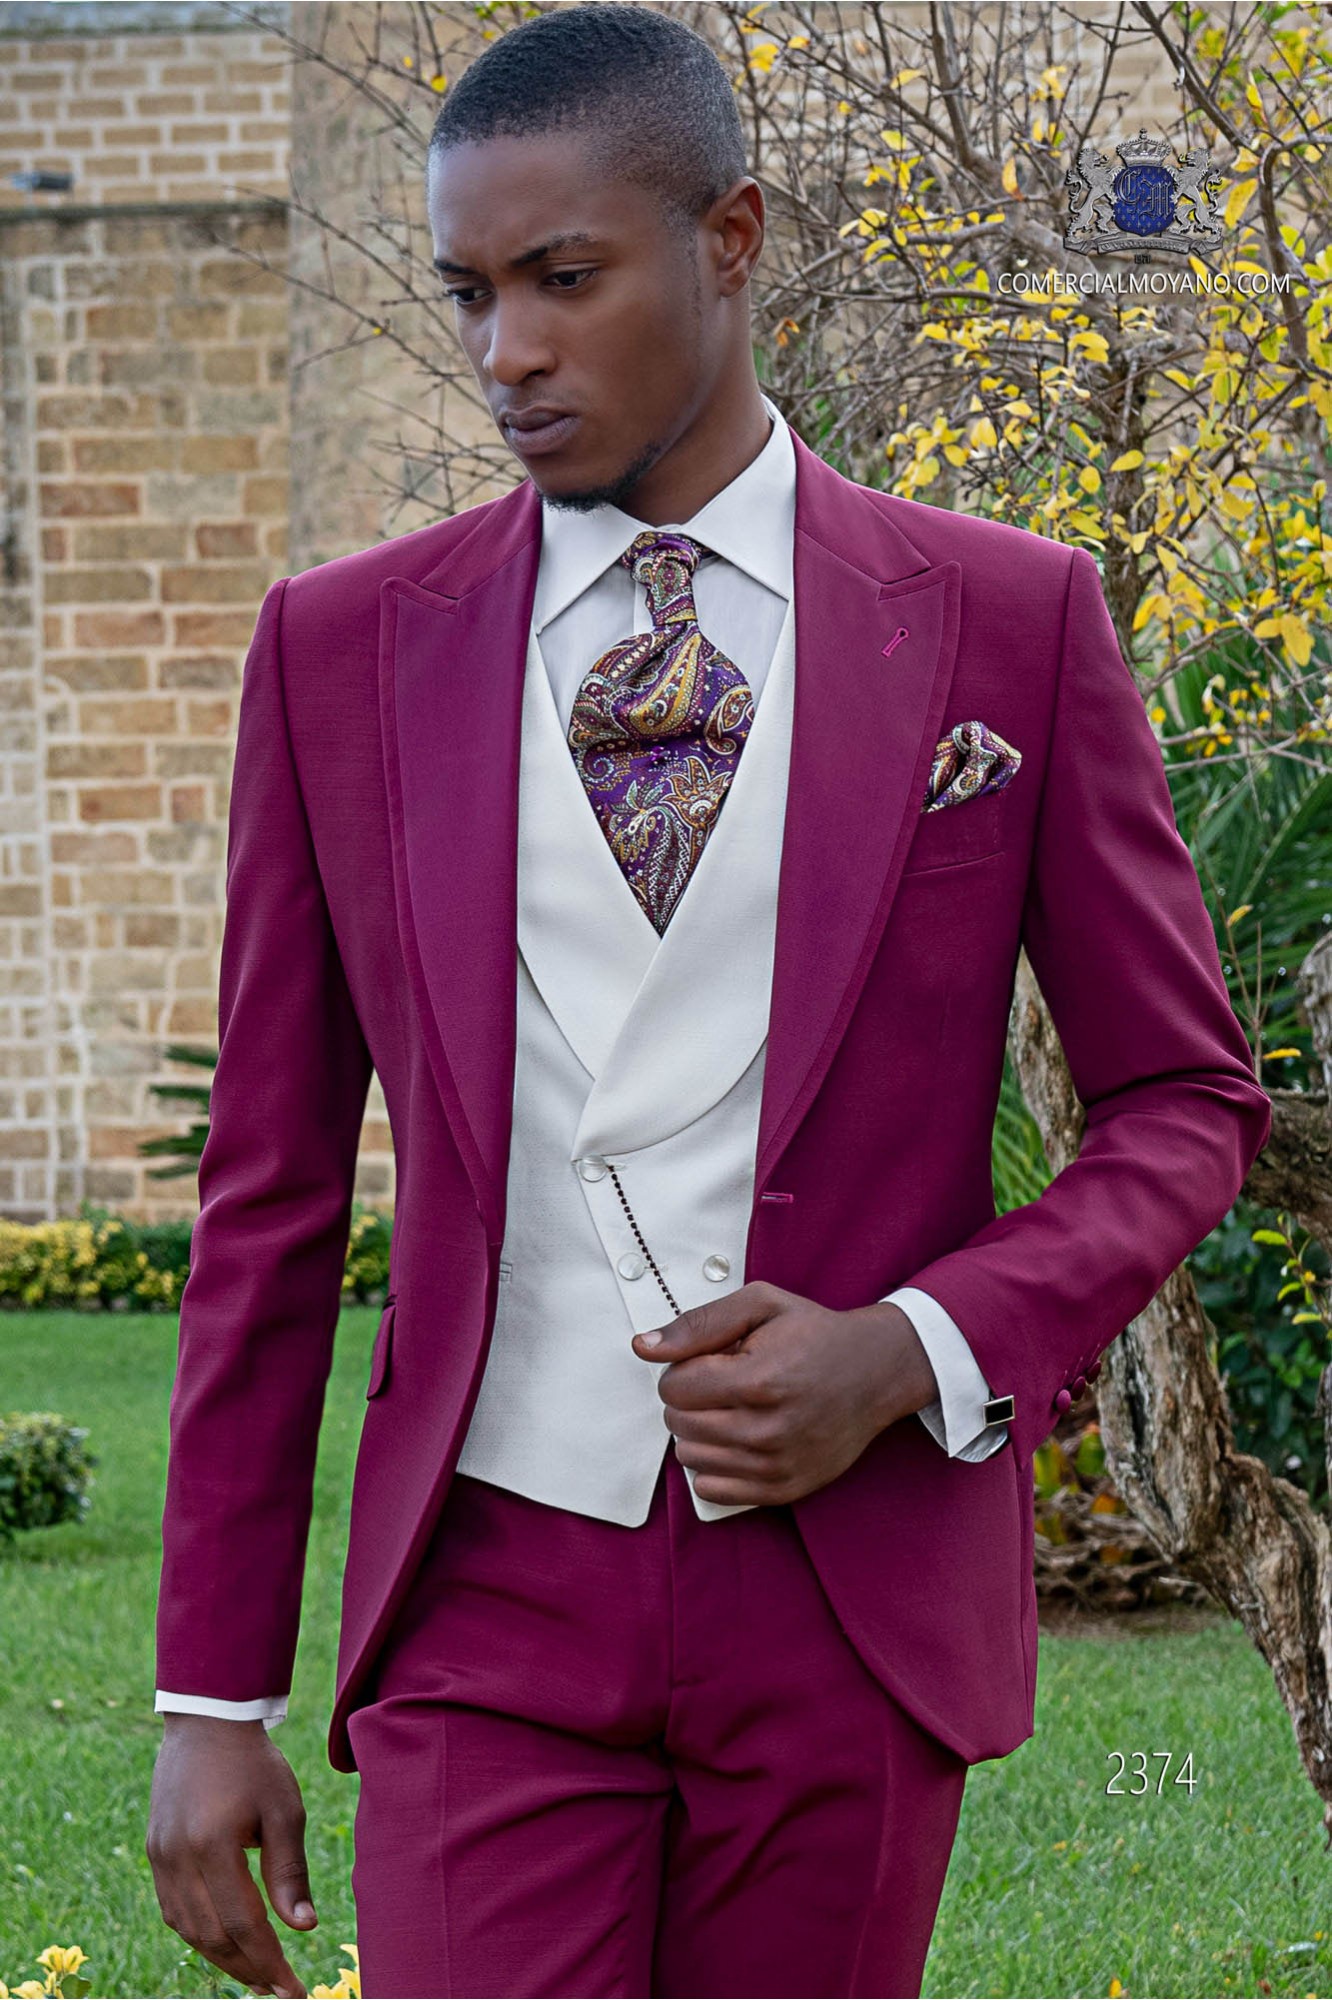 Wedding suit Slim stylish cut. Peak lapel with contrast fabric piping. Made from wool and acetate fabric in Burgundy